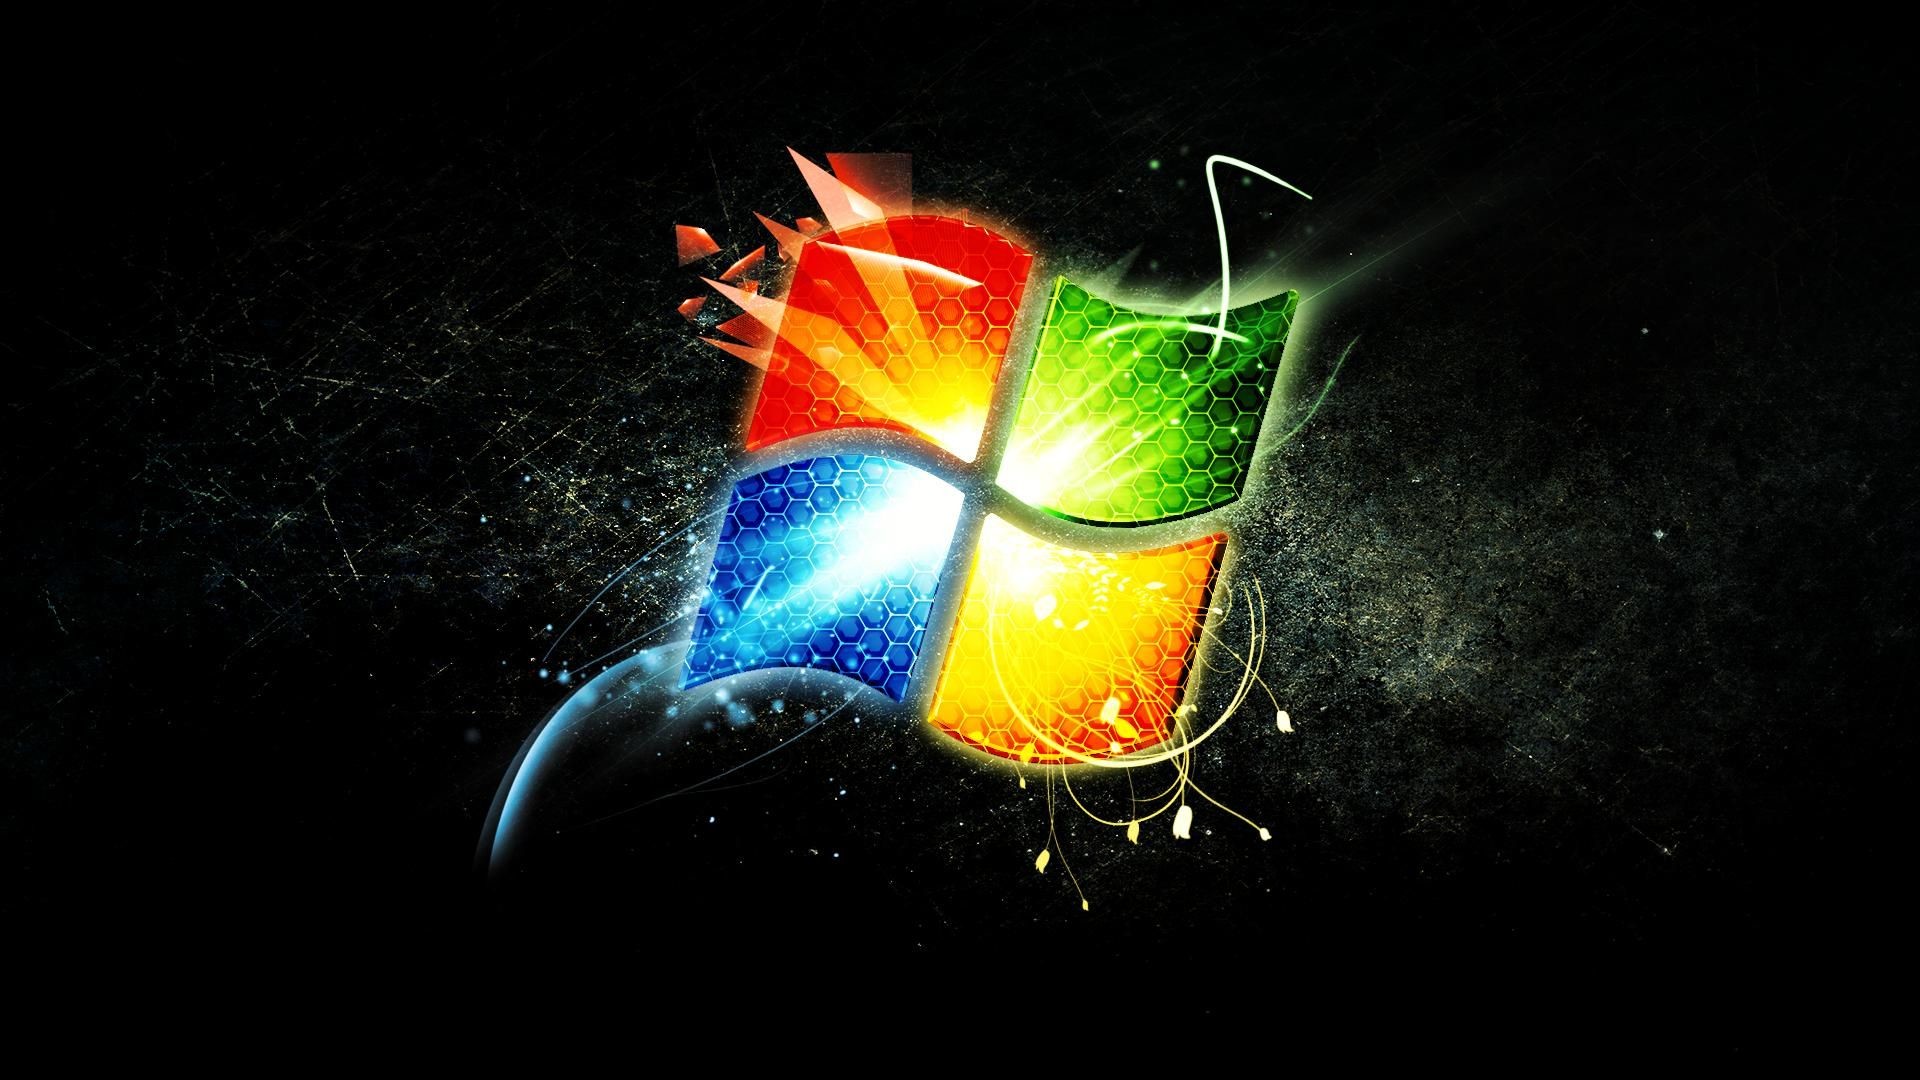 1920x1080 Gif Backgrounds Windows 7 - Wallpaper Cave